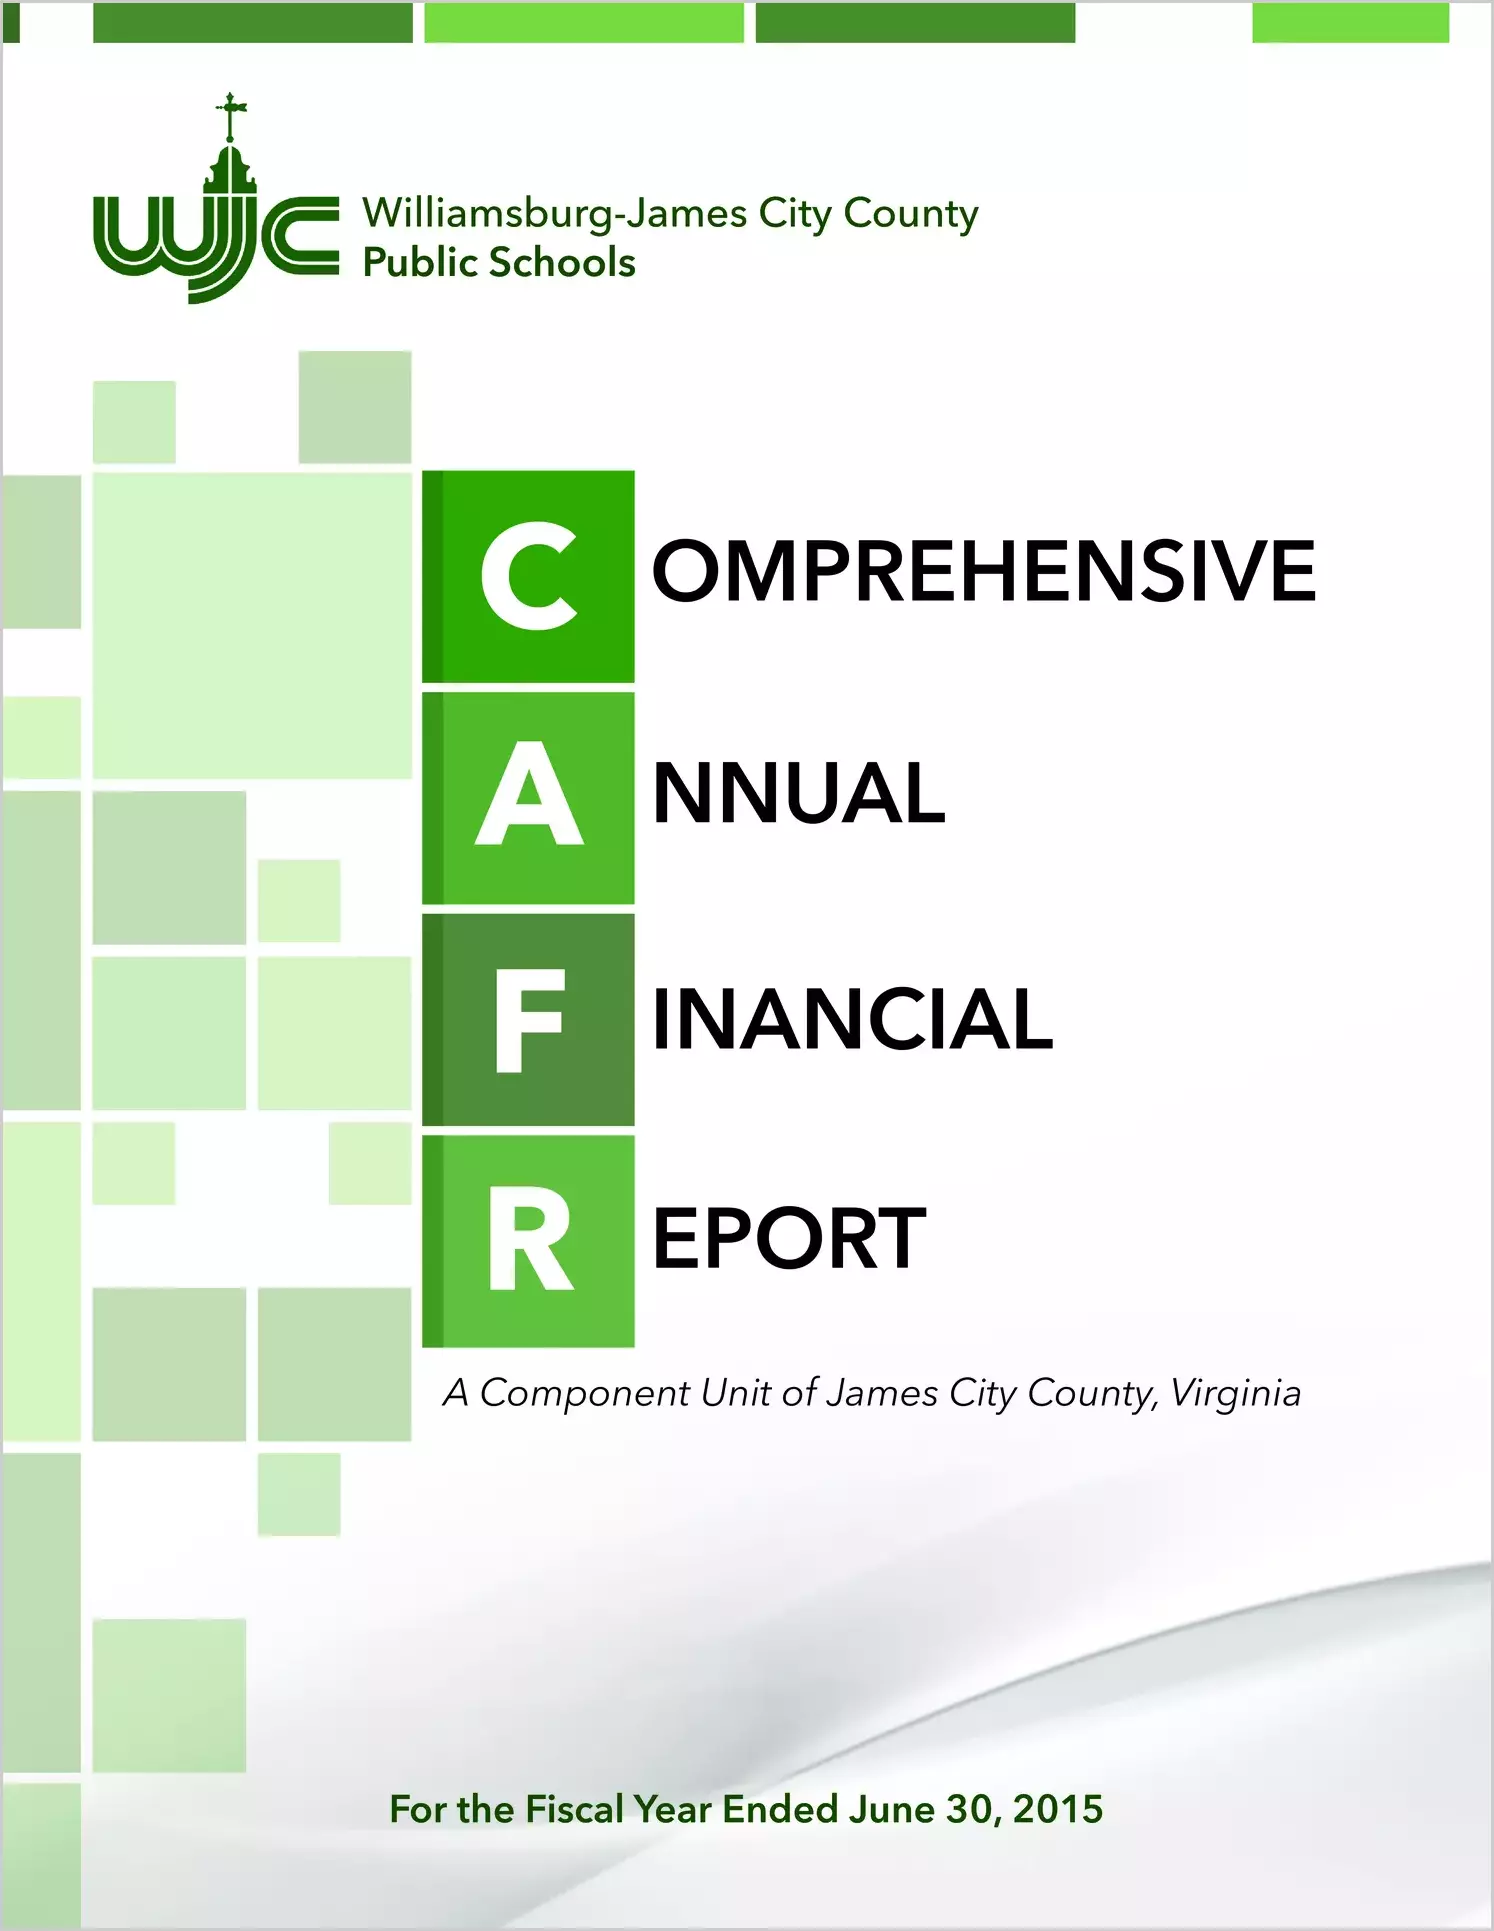 2015 Public Schools Annual Financial Report for County of James City